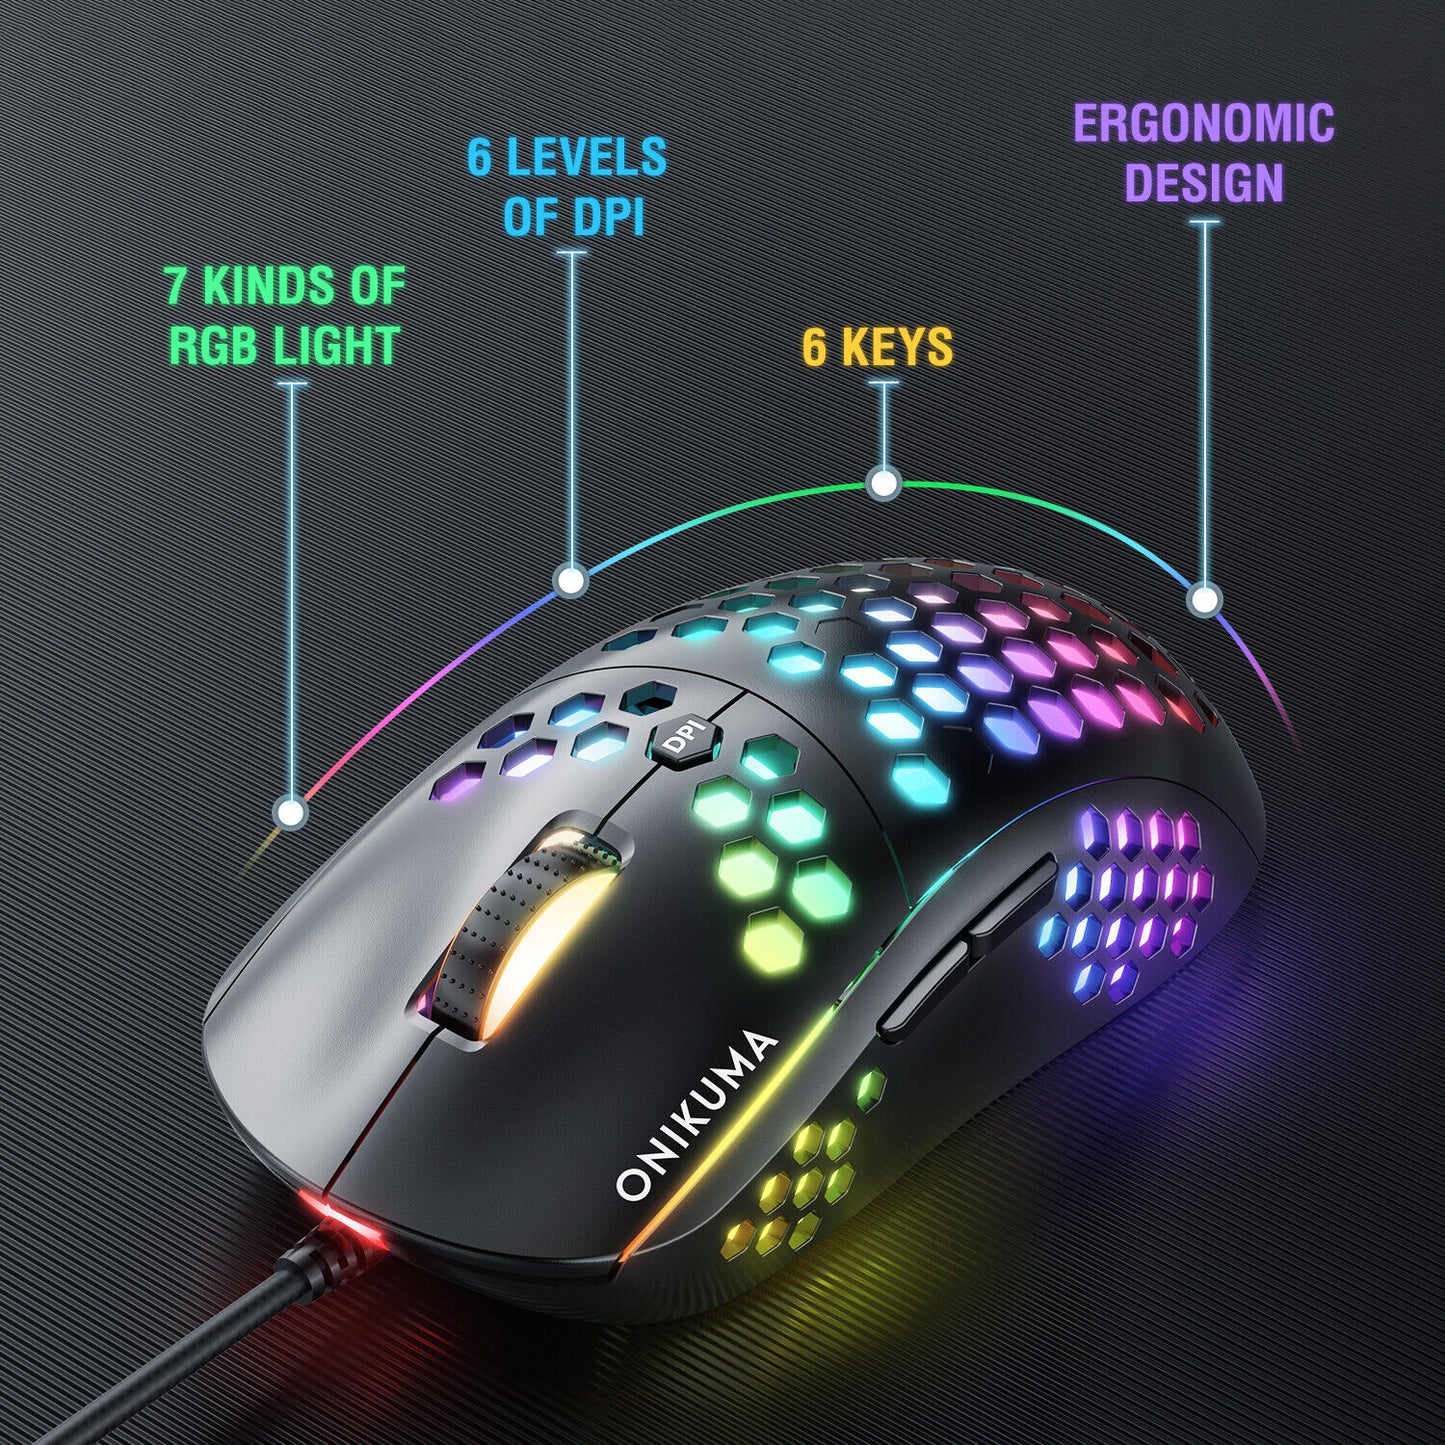 CW903 RGB Six-Speed Adjustable honeycomb Non-Slip Wired Gaming Mouse